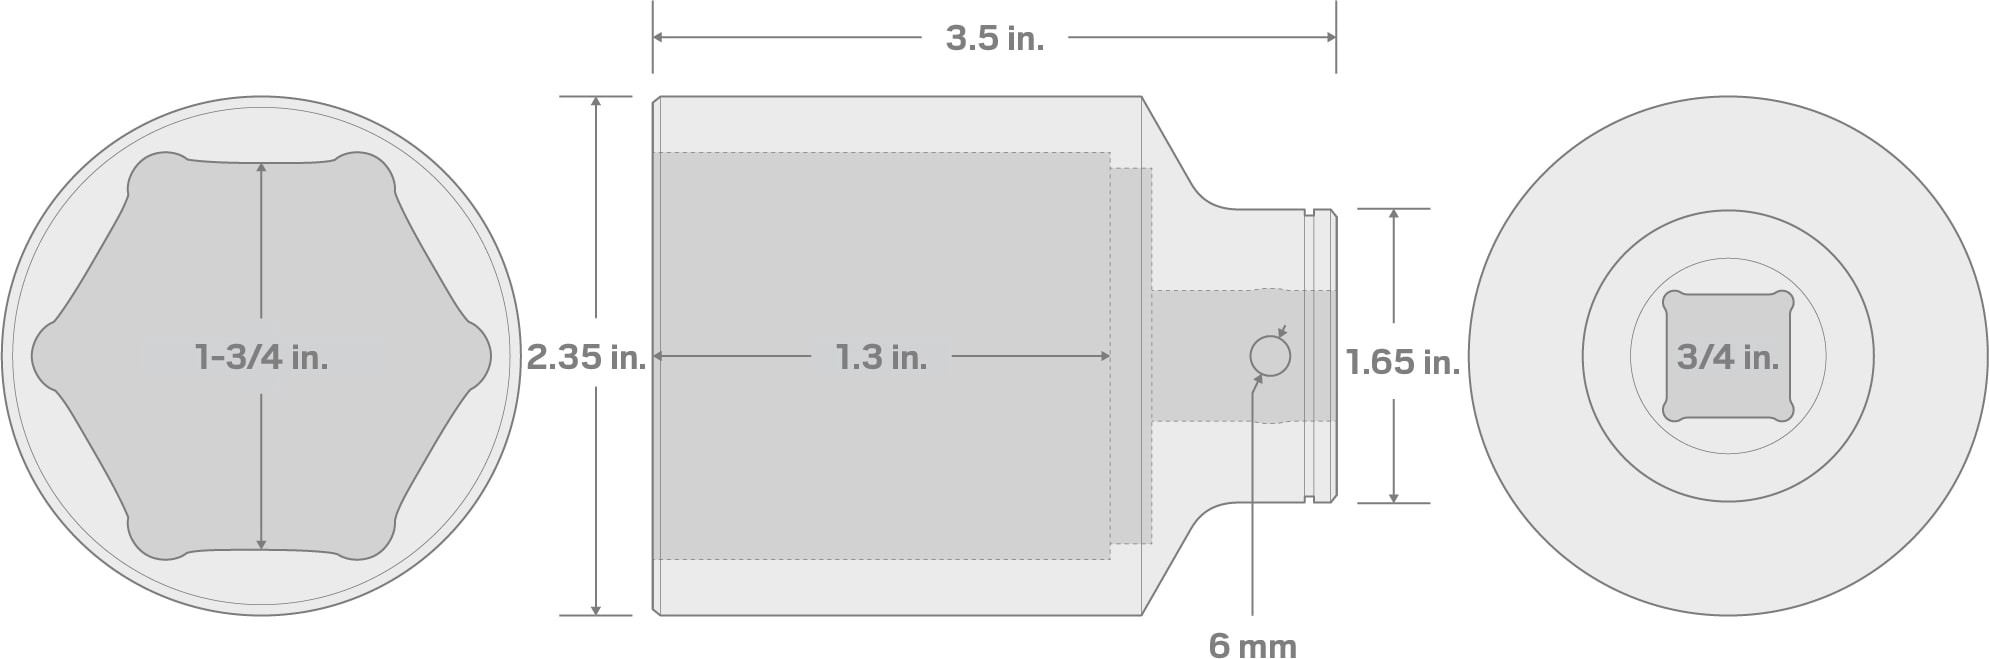 Specs for 3/4 Inch Drive x 1-3/4 Inch Deep 6-Point Socket